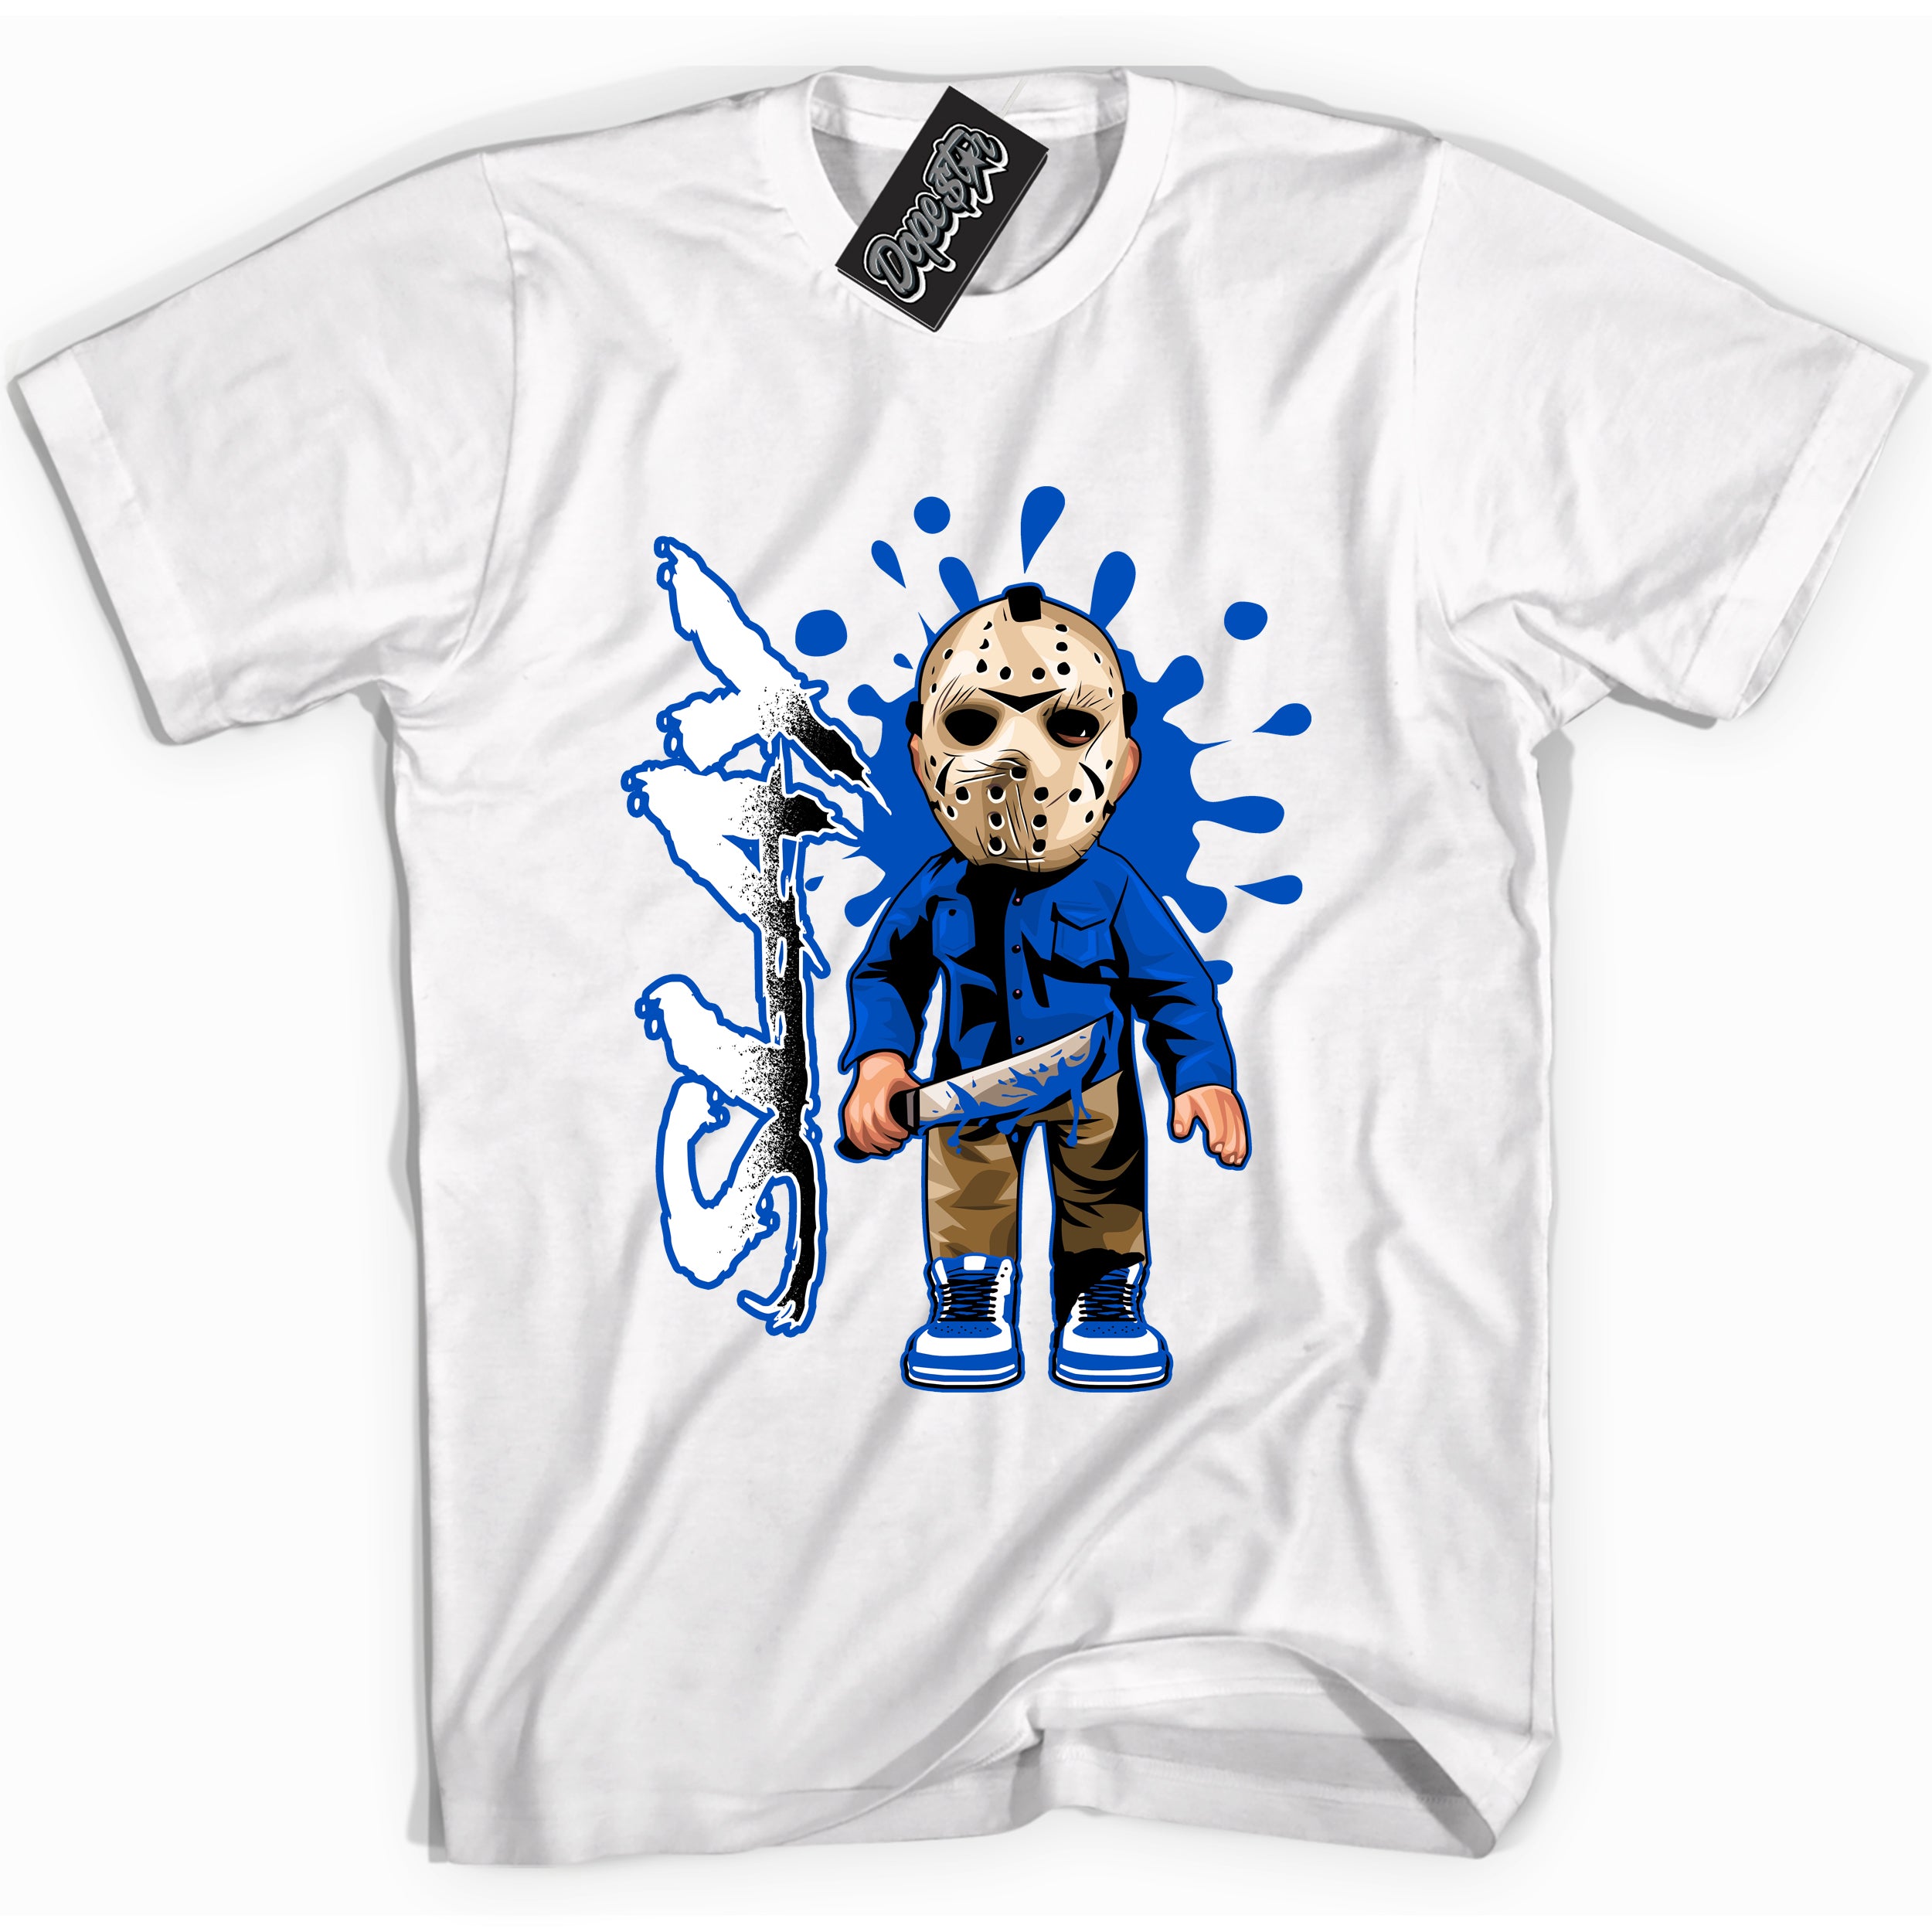 Cool White graphic tee with "Slay" design, that perfectly matches Royal Reimagined 1s sneakers 